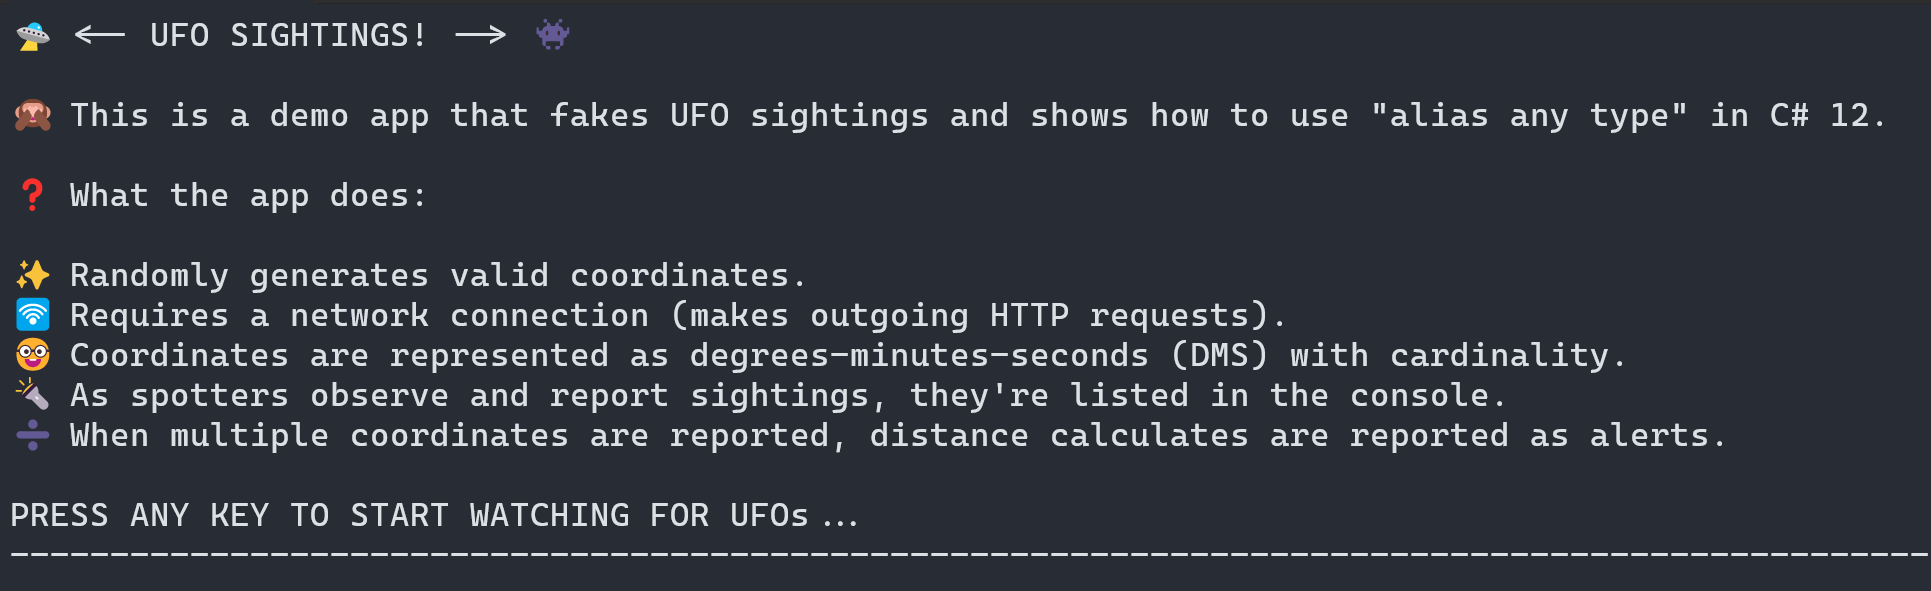 UFO Sightings: A screen capture of the app start with an introduction printed to the console.